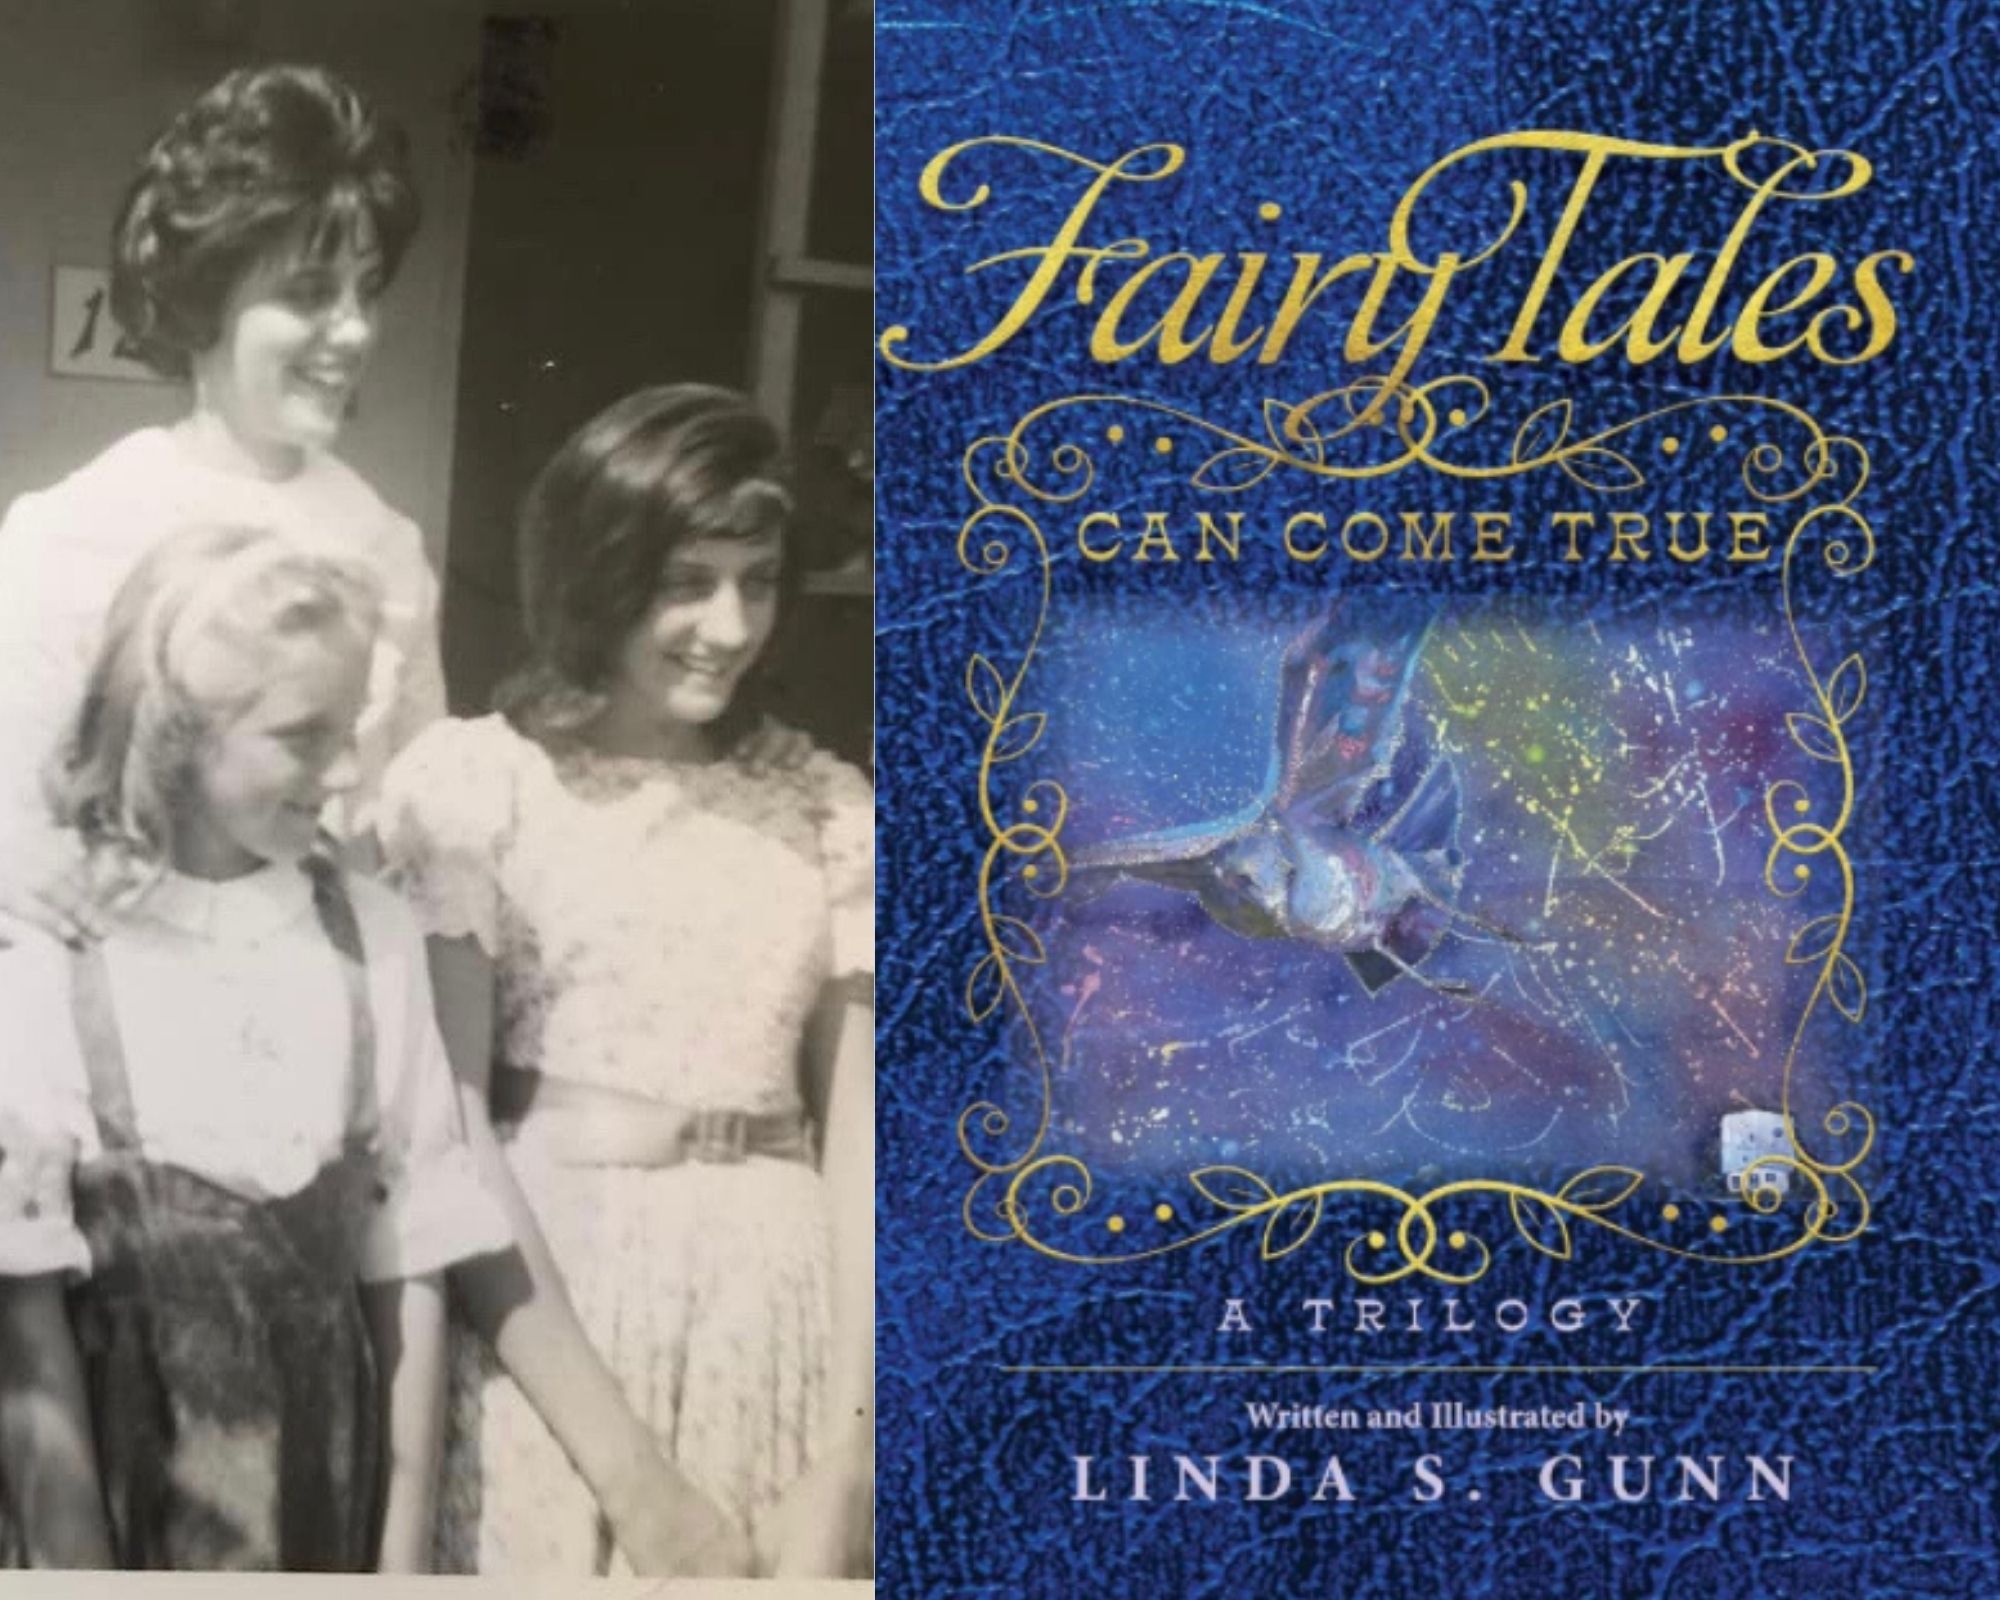 Linda S. Gunn’s Maiden Book Fairy Tales Can Come True Is an Exciting Read for Young Adults